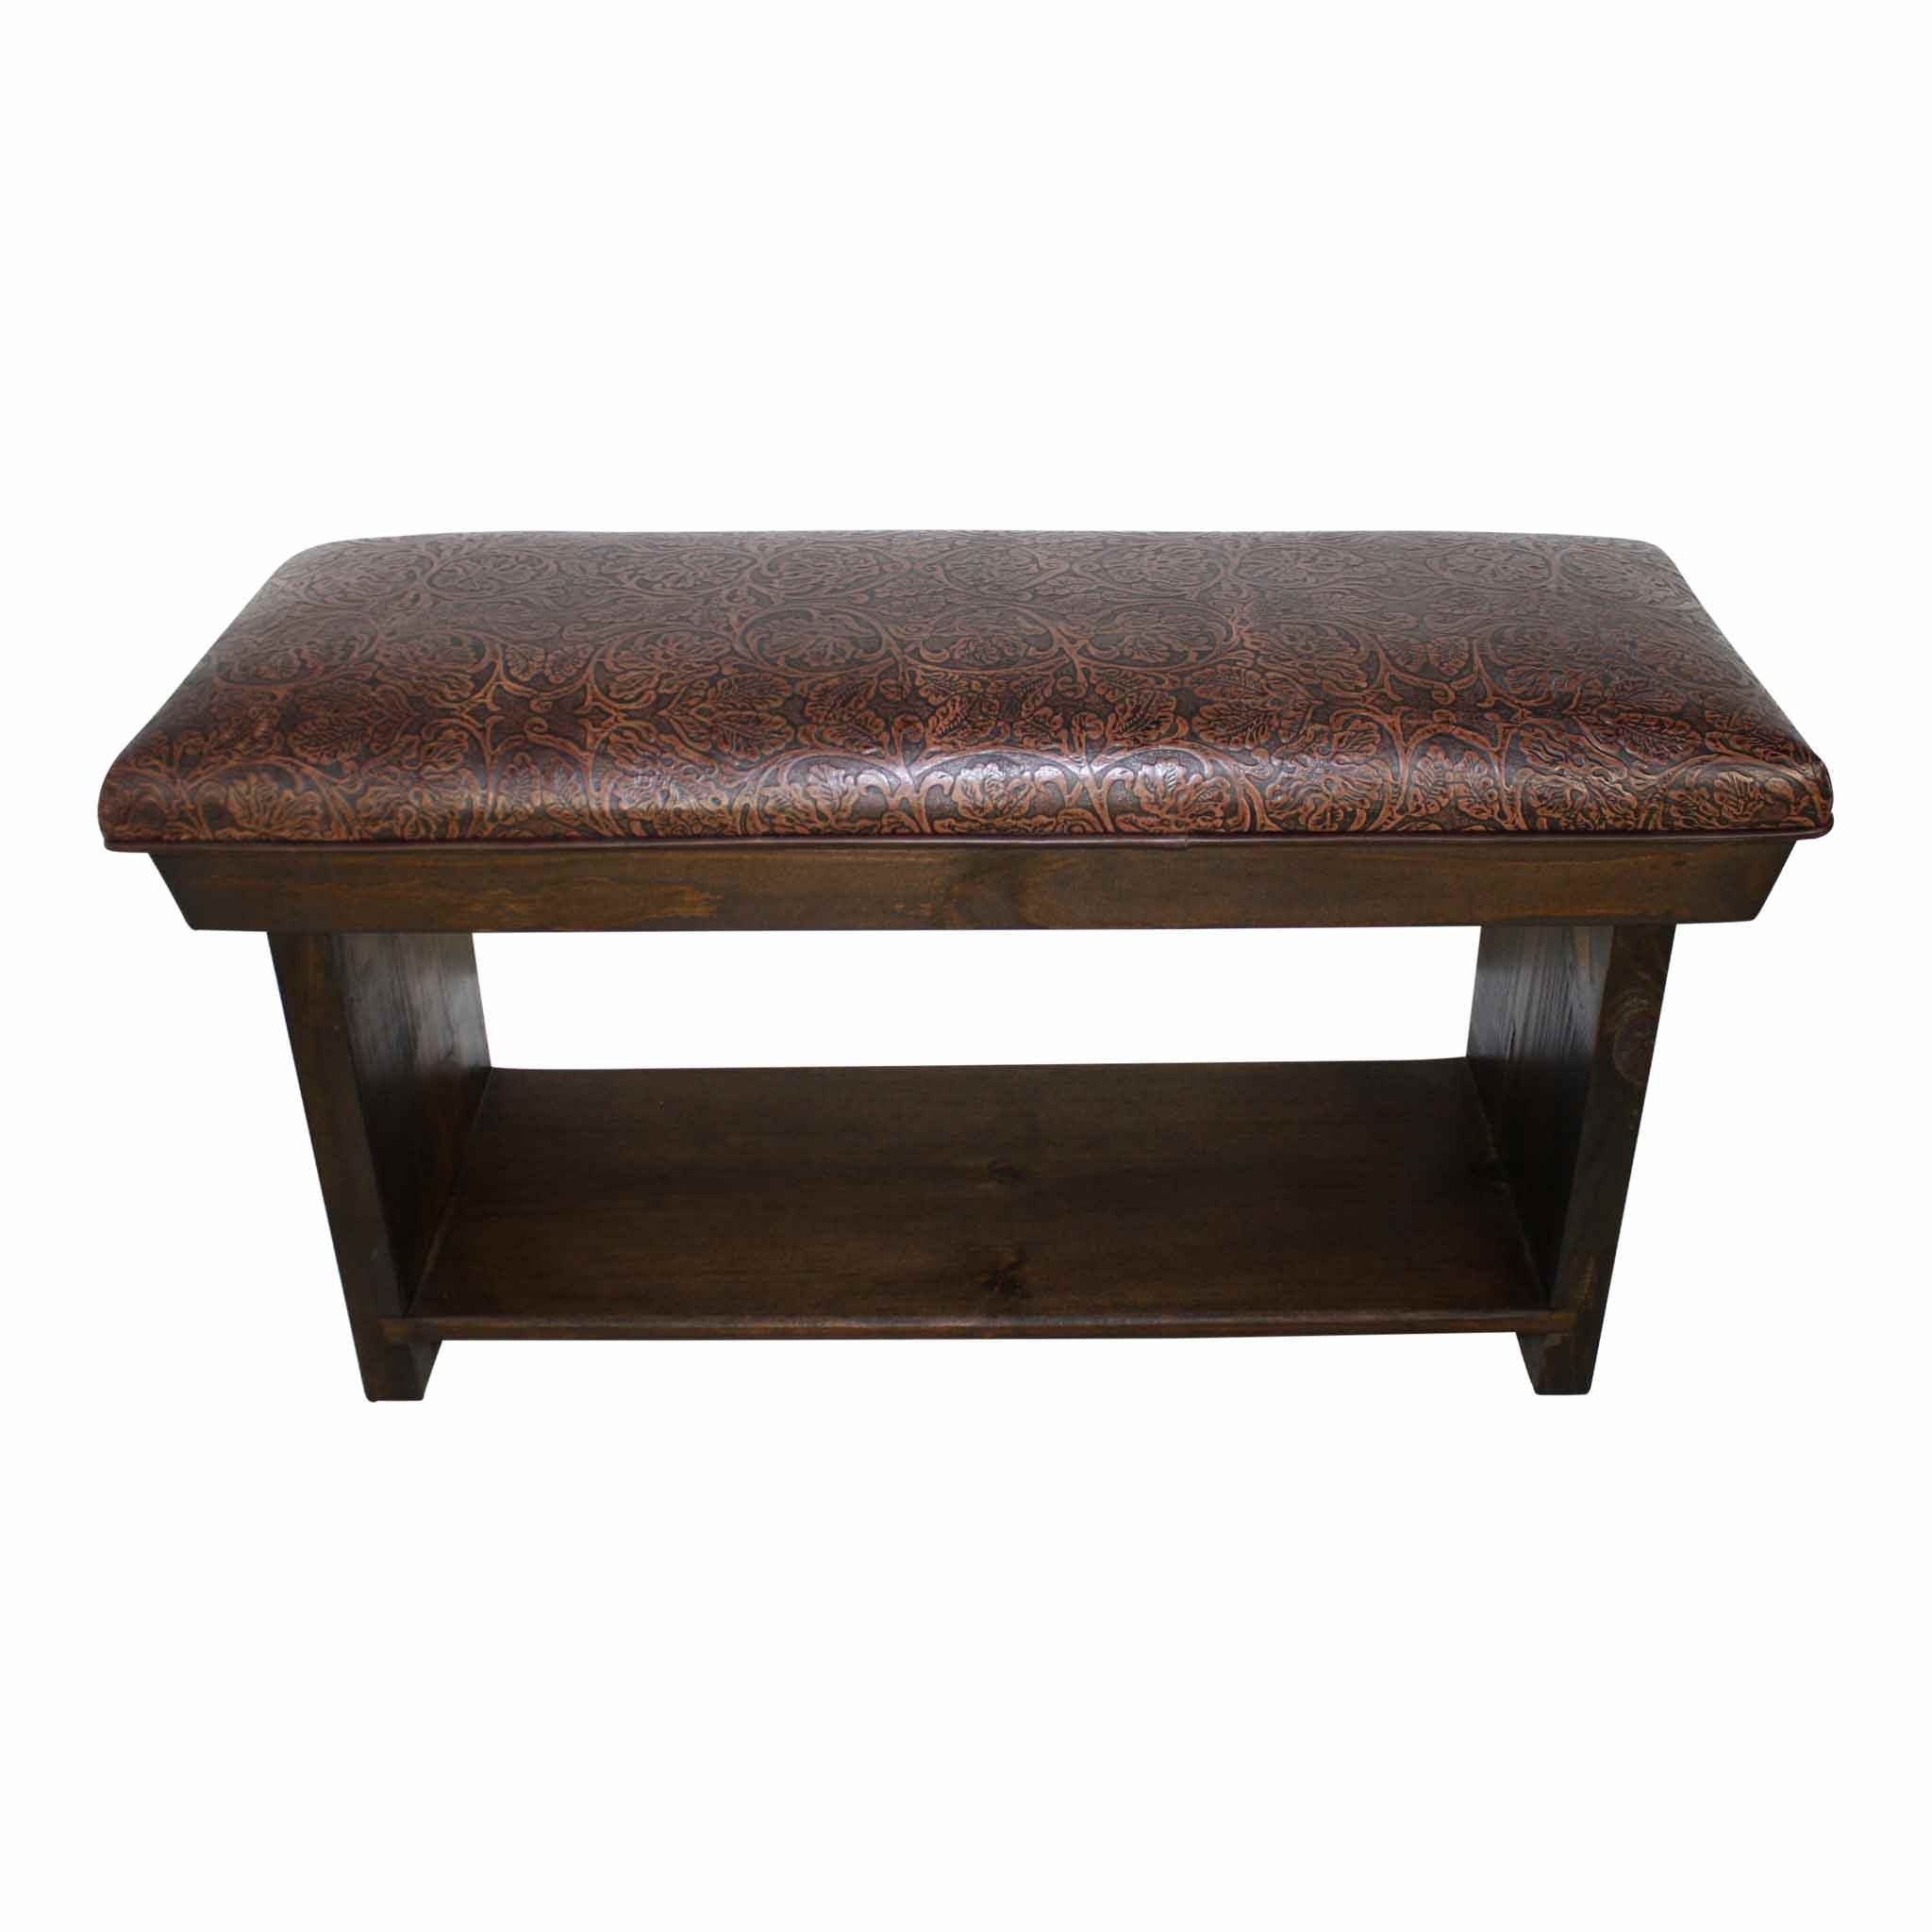 Cowboy Chocolate Pressed Leather Bench with Shelf